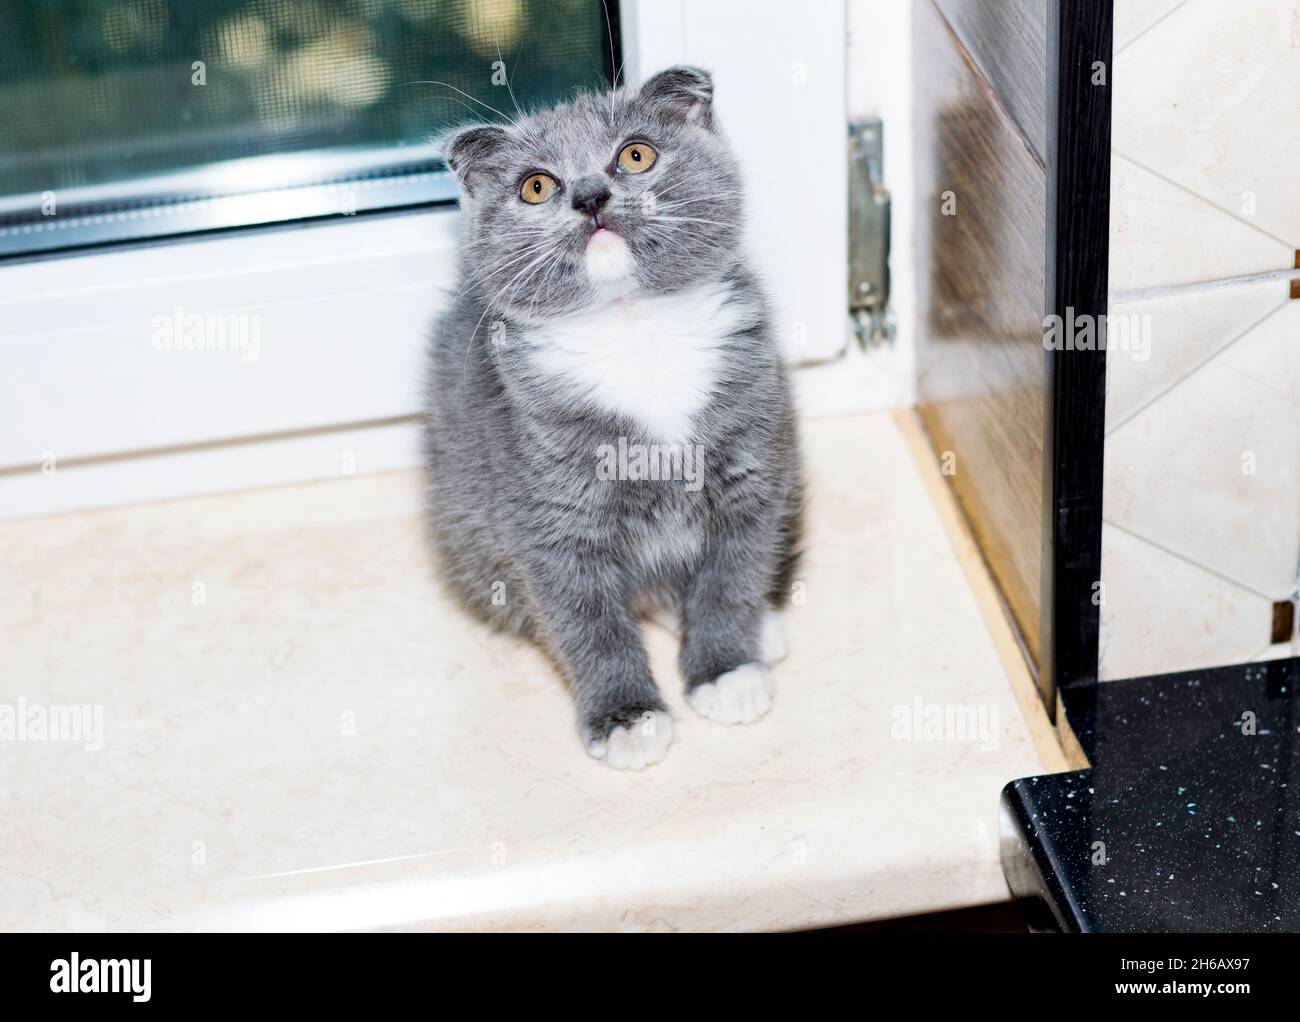 scottish bicolor blue kitten by the window in the kitchen, kitten in the kitchen, pet kitten, theme pet cats and kittens Stock Photo